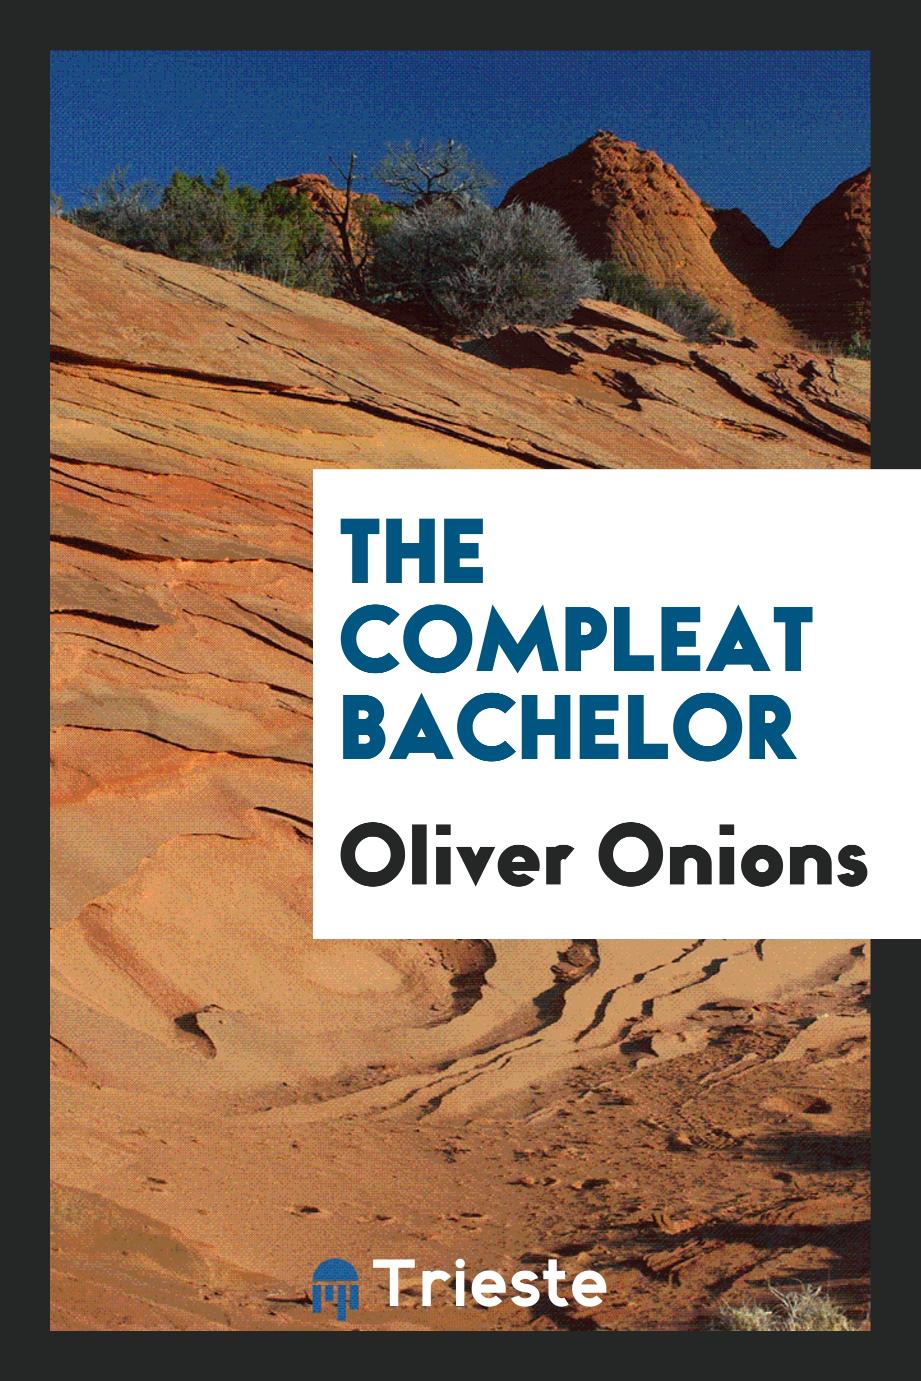 The compleat bachelor